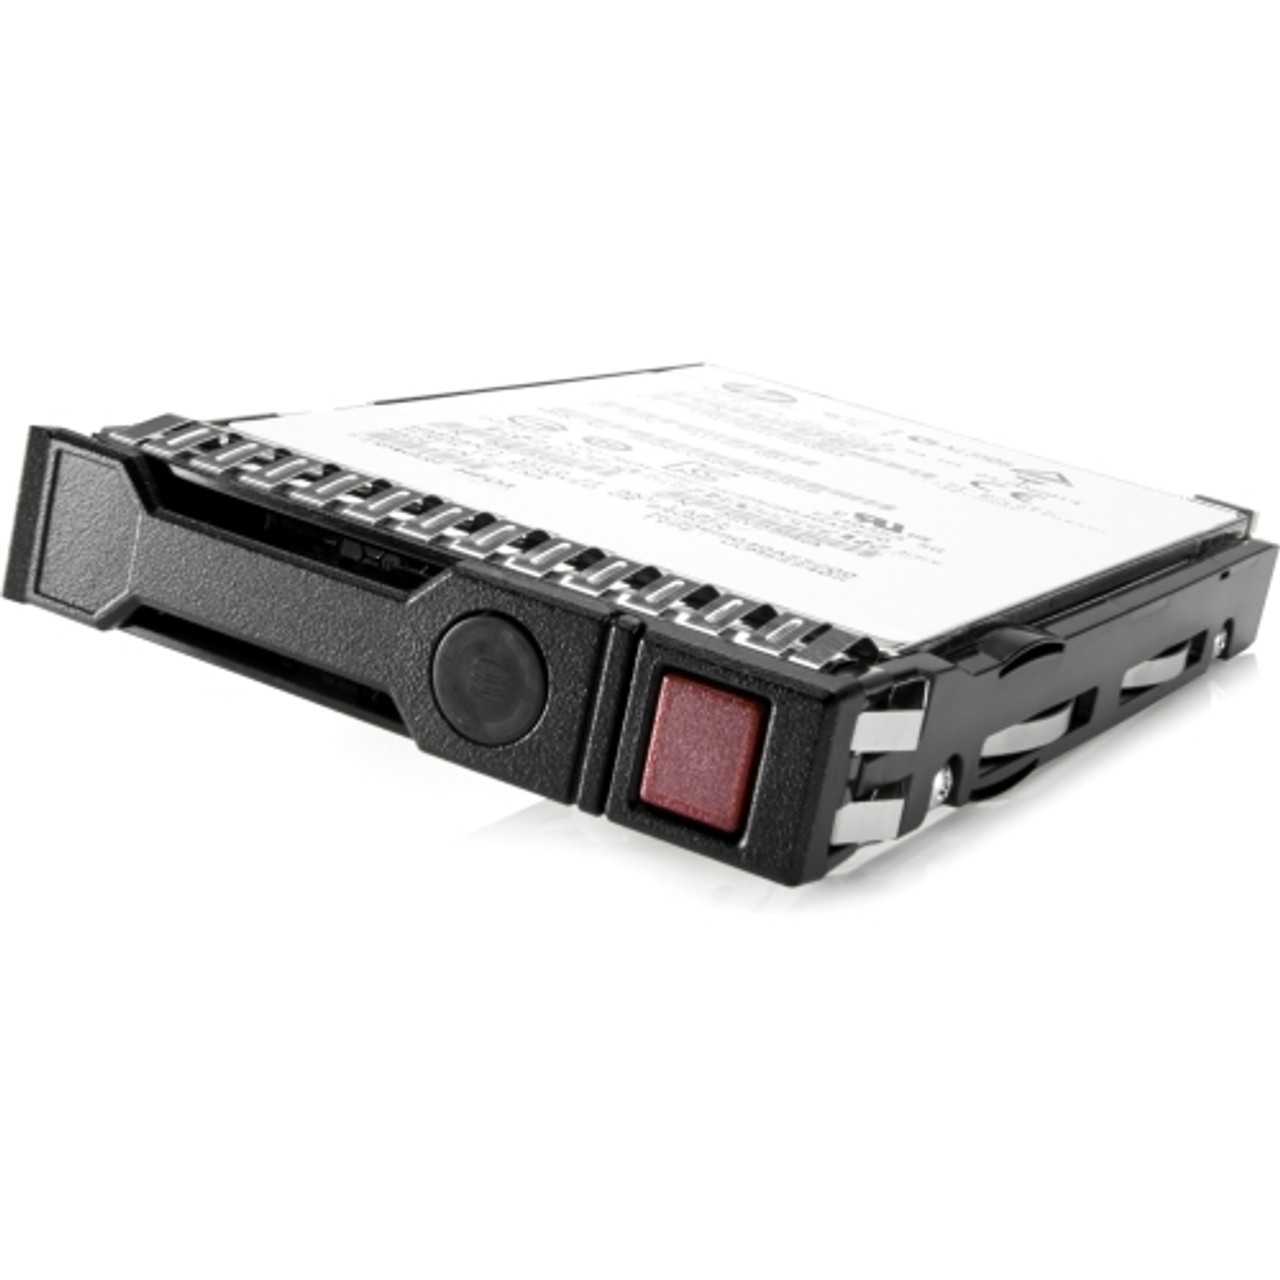 872479-B21 HPE 1.2TB 10000RPM SAS 12Gbps 2.5-inch Internal Hard Drive with Smart Carrier